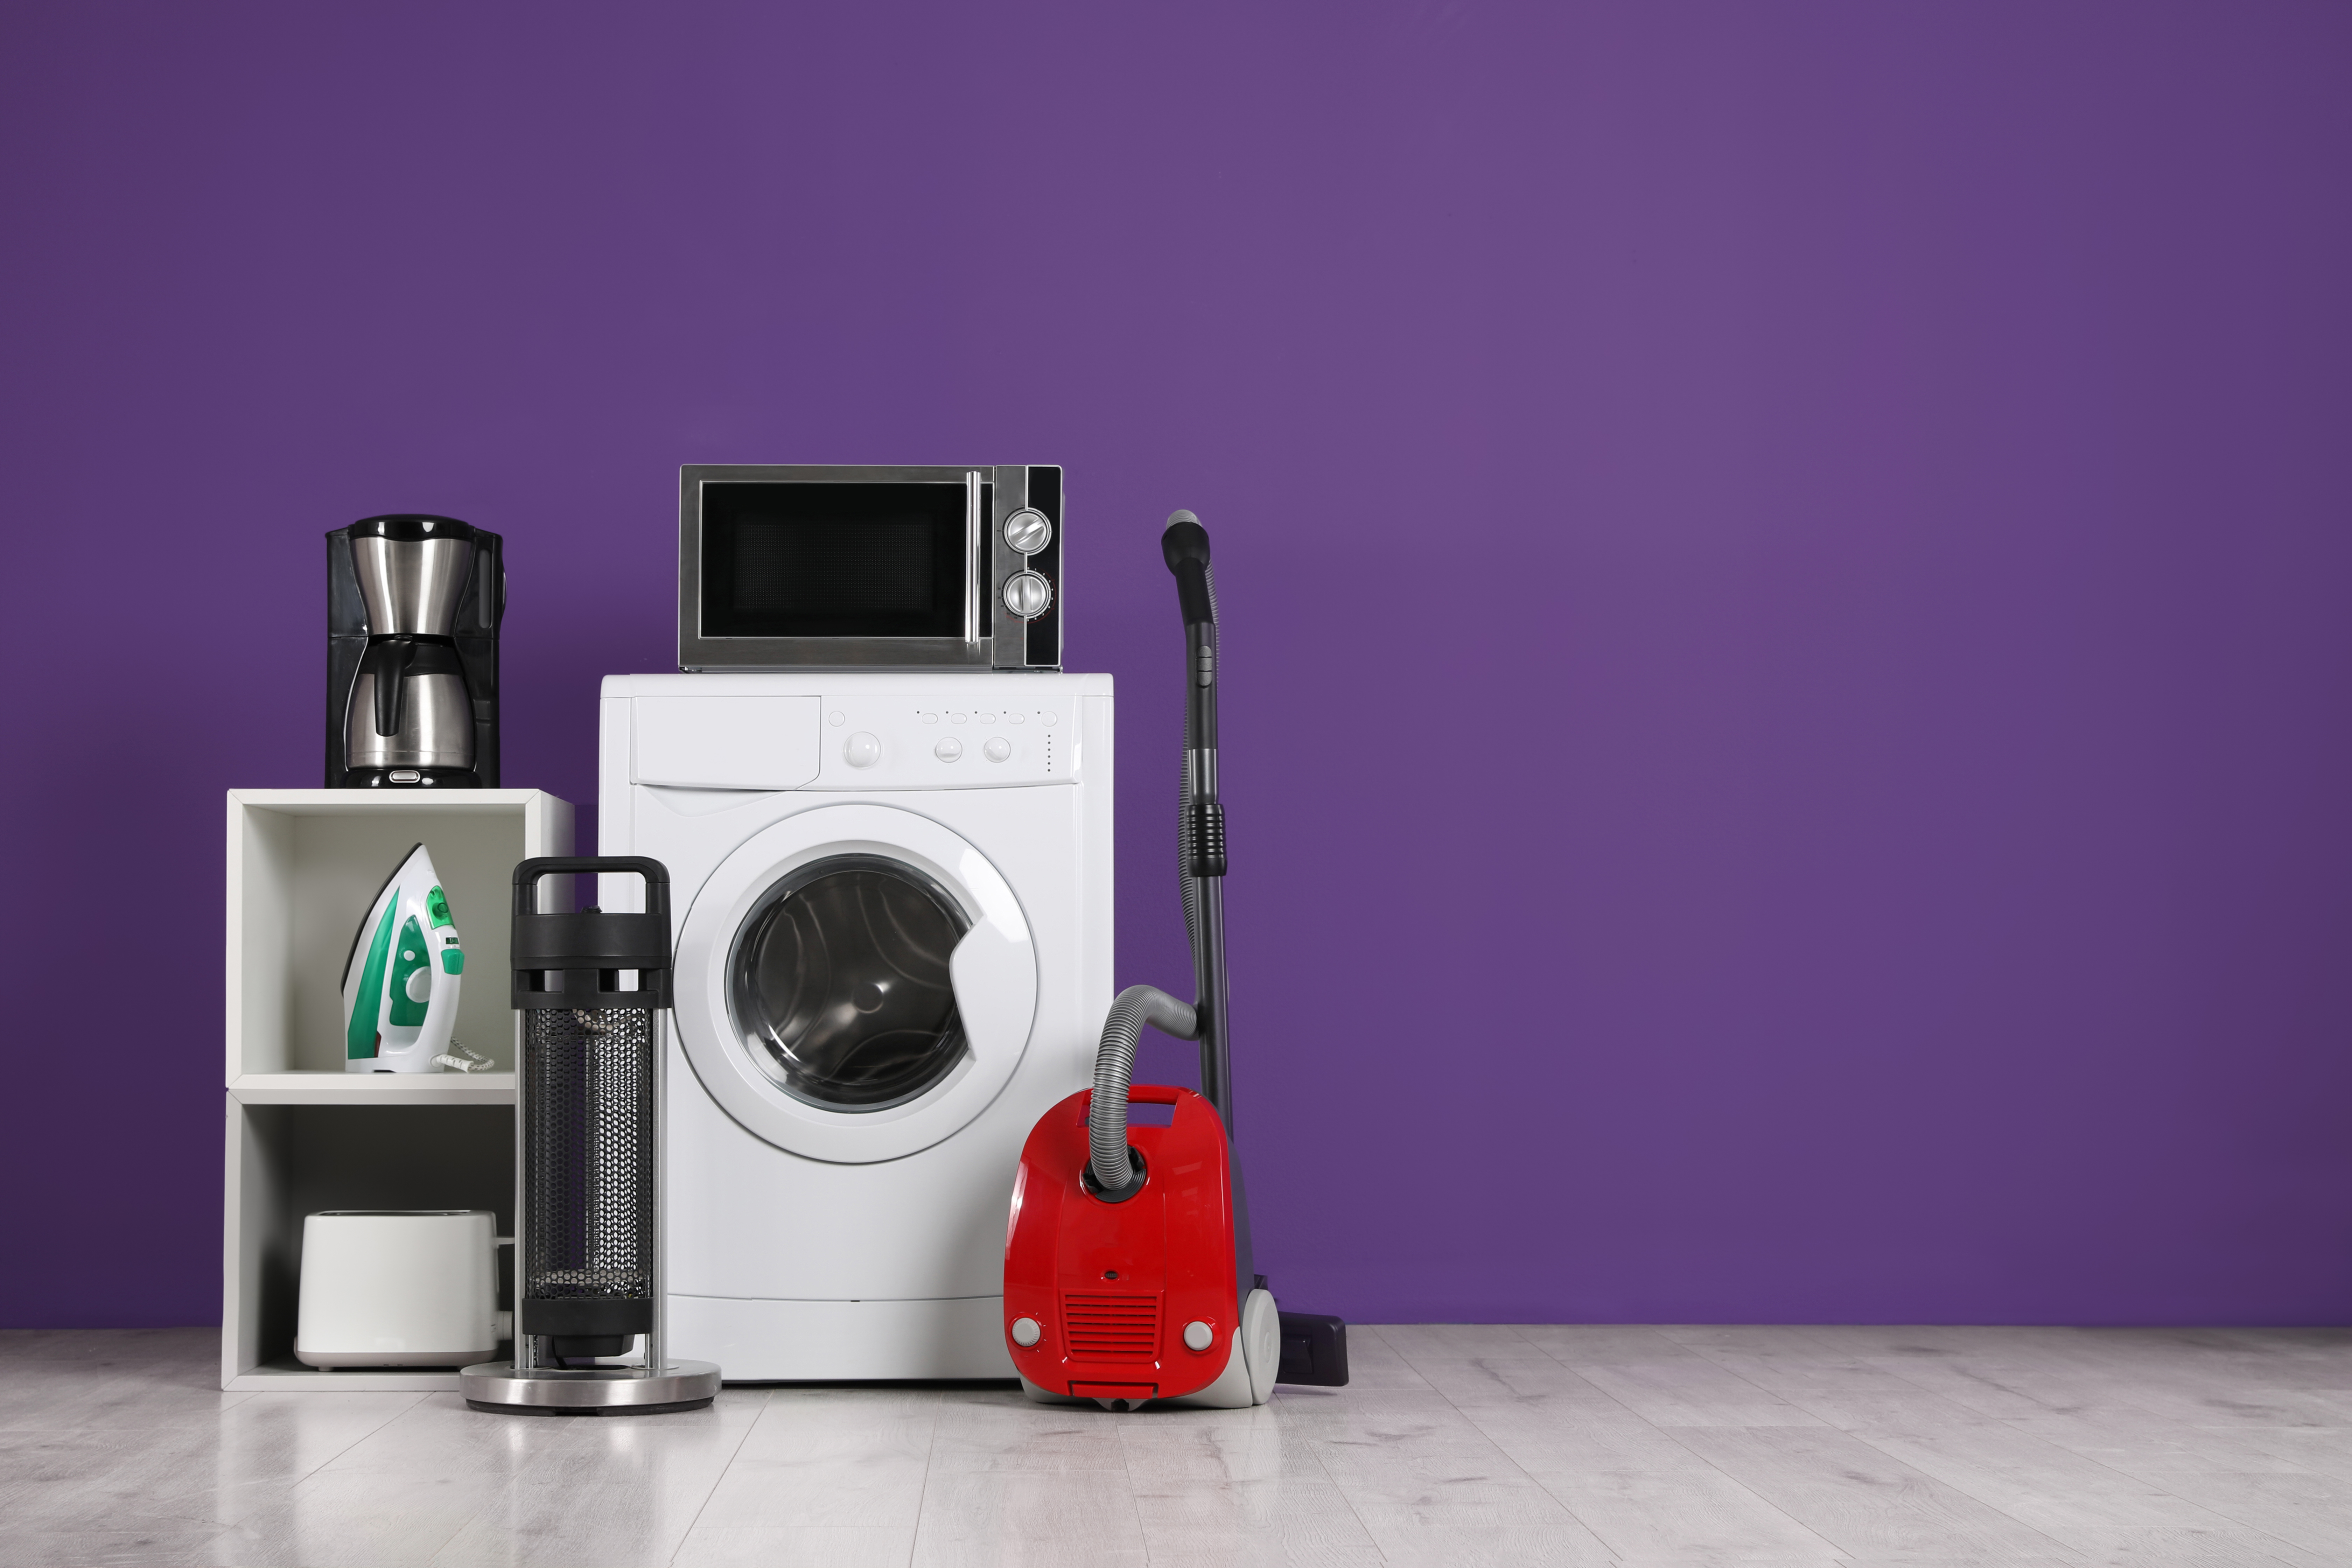 Set of appliances against a colored background